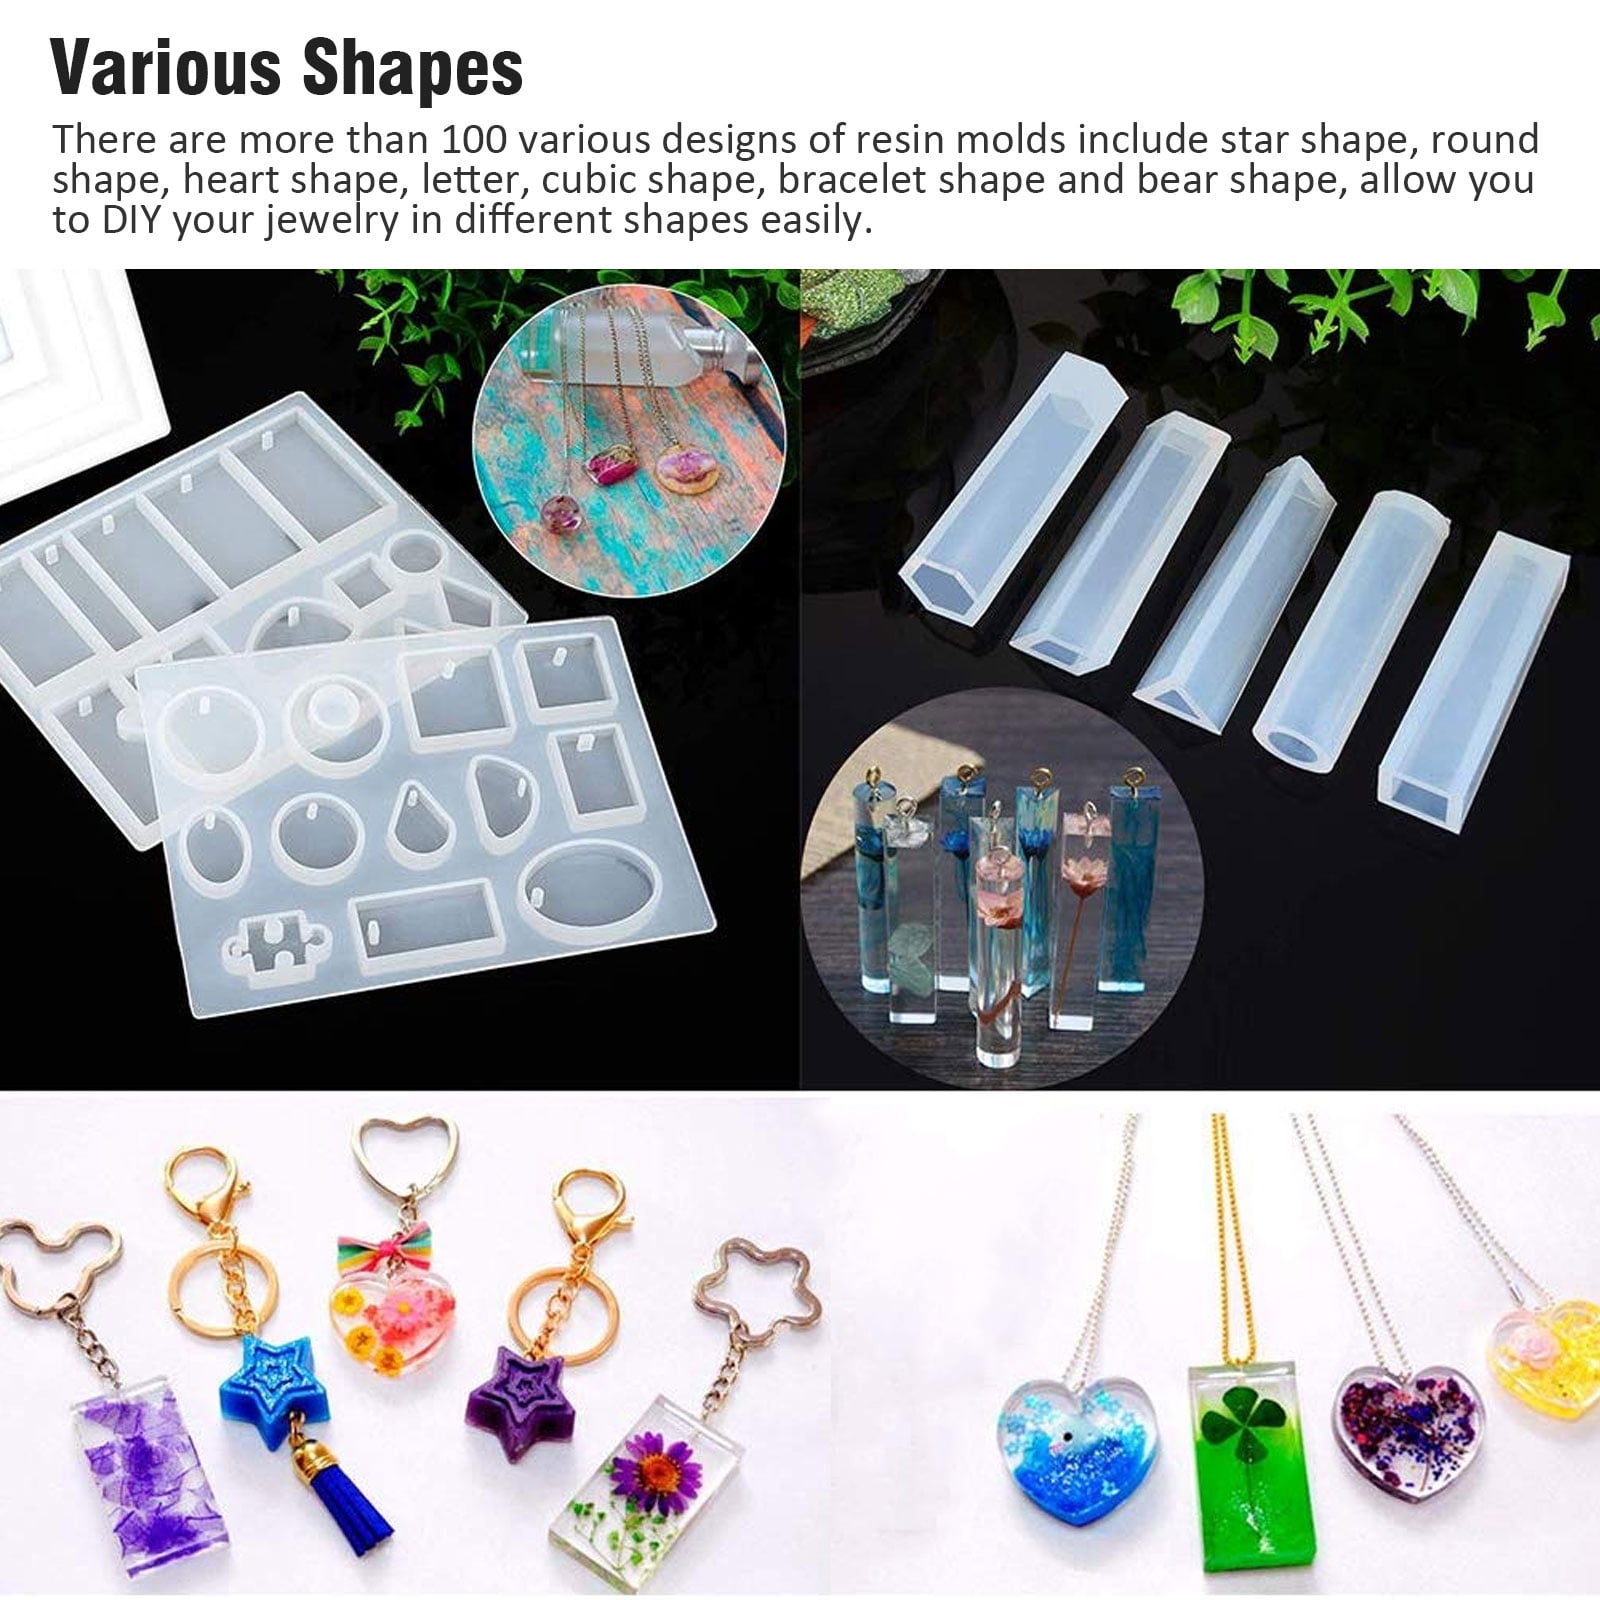 Eye Screw Pins and Making Tools for Jewelry Craft Making JMPZDZ Stud Earrings SEVEN HITECH Silicone Resin Kits Jewelry Casting Mould Tools Set Included Jewelry Pendant Moulds